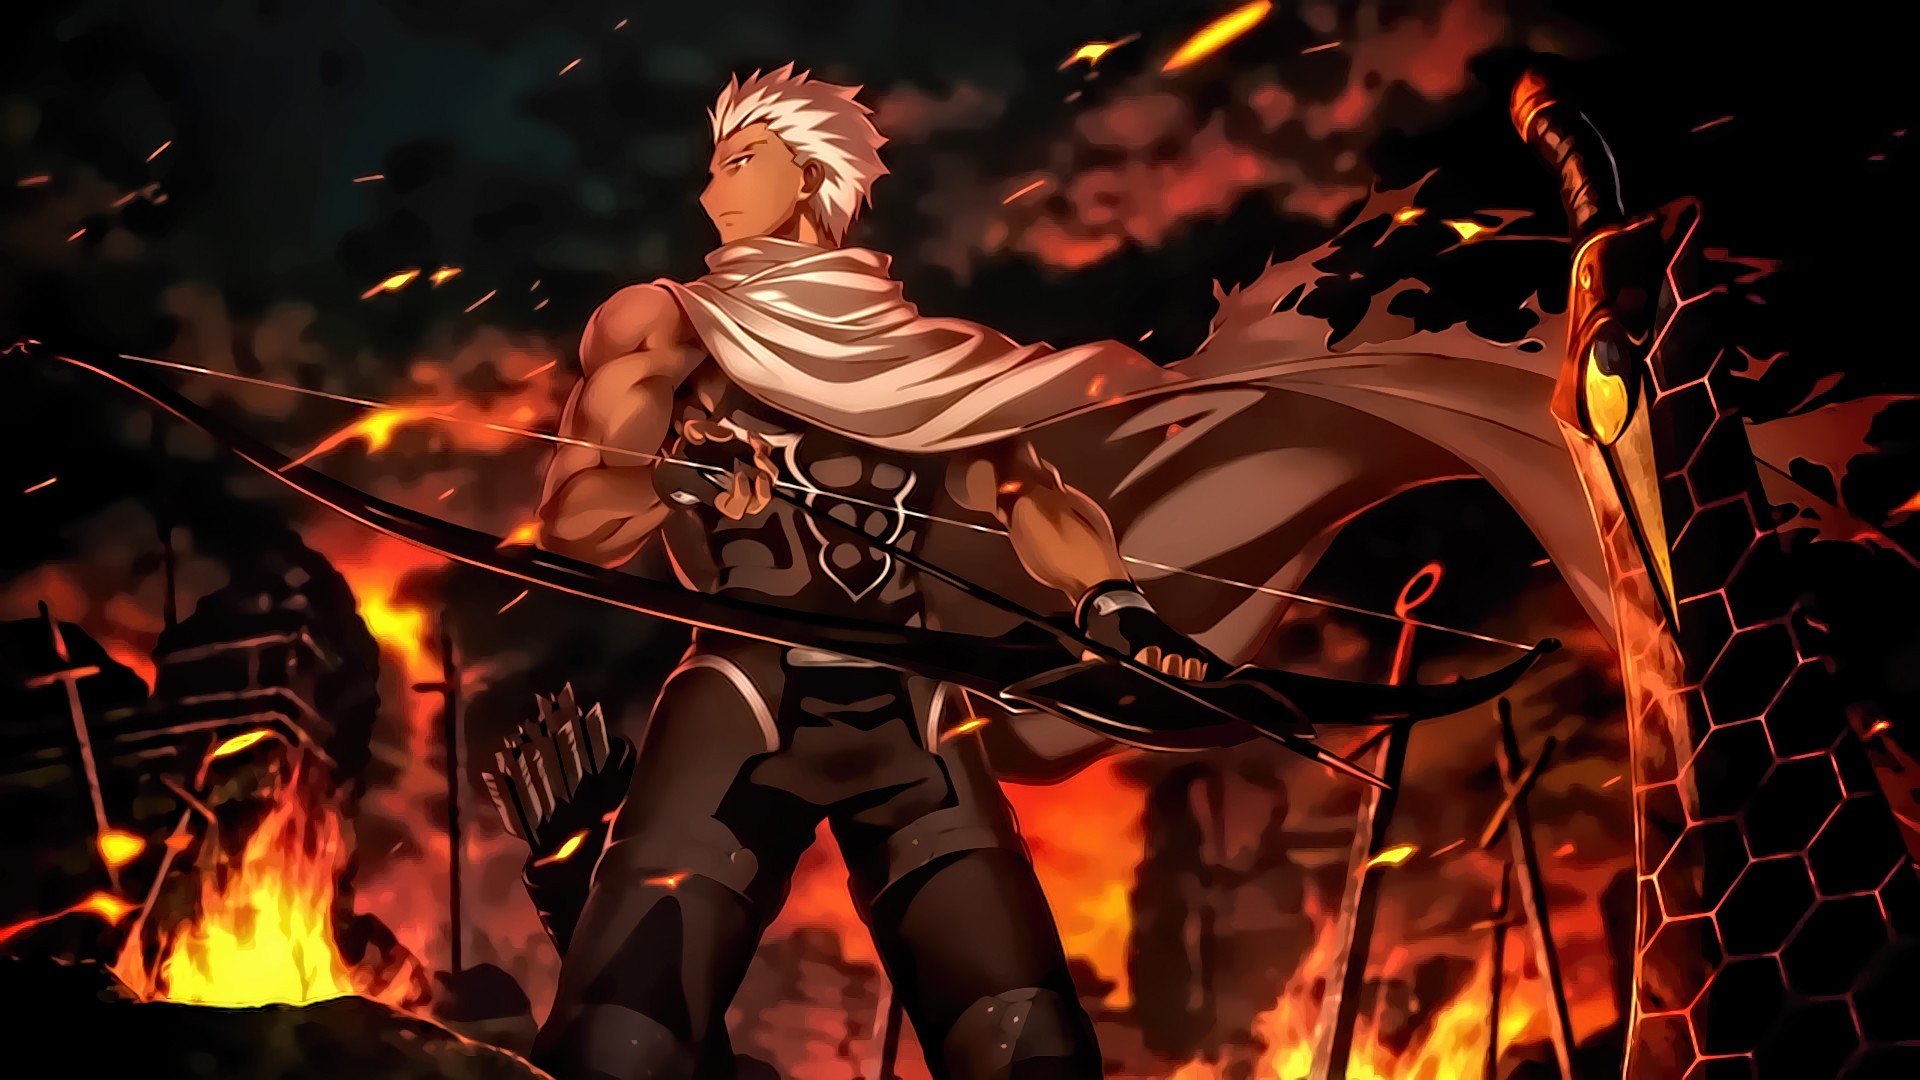 Fate Stay Night Unlimited Blade Works Archer Fate Series Sword Archer Fate Stay Night Fire Cloaks Wh 1920x1080